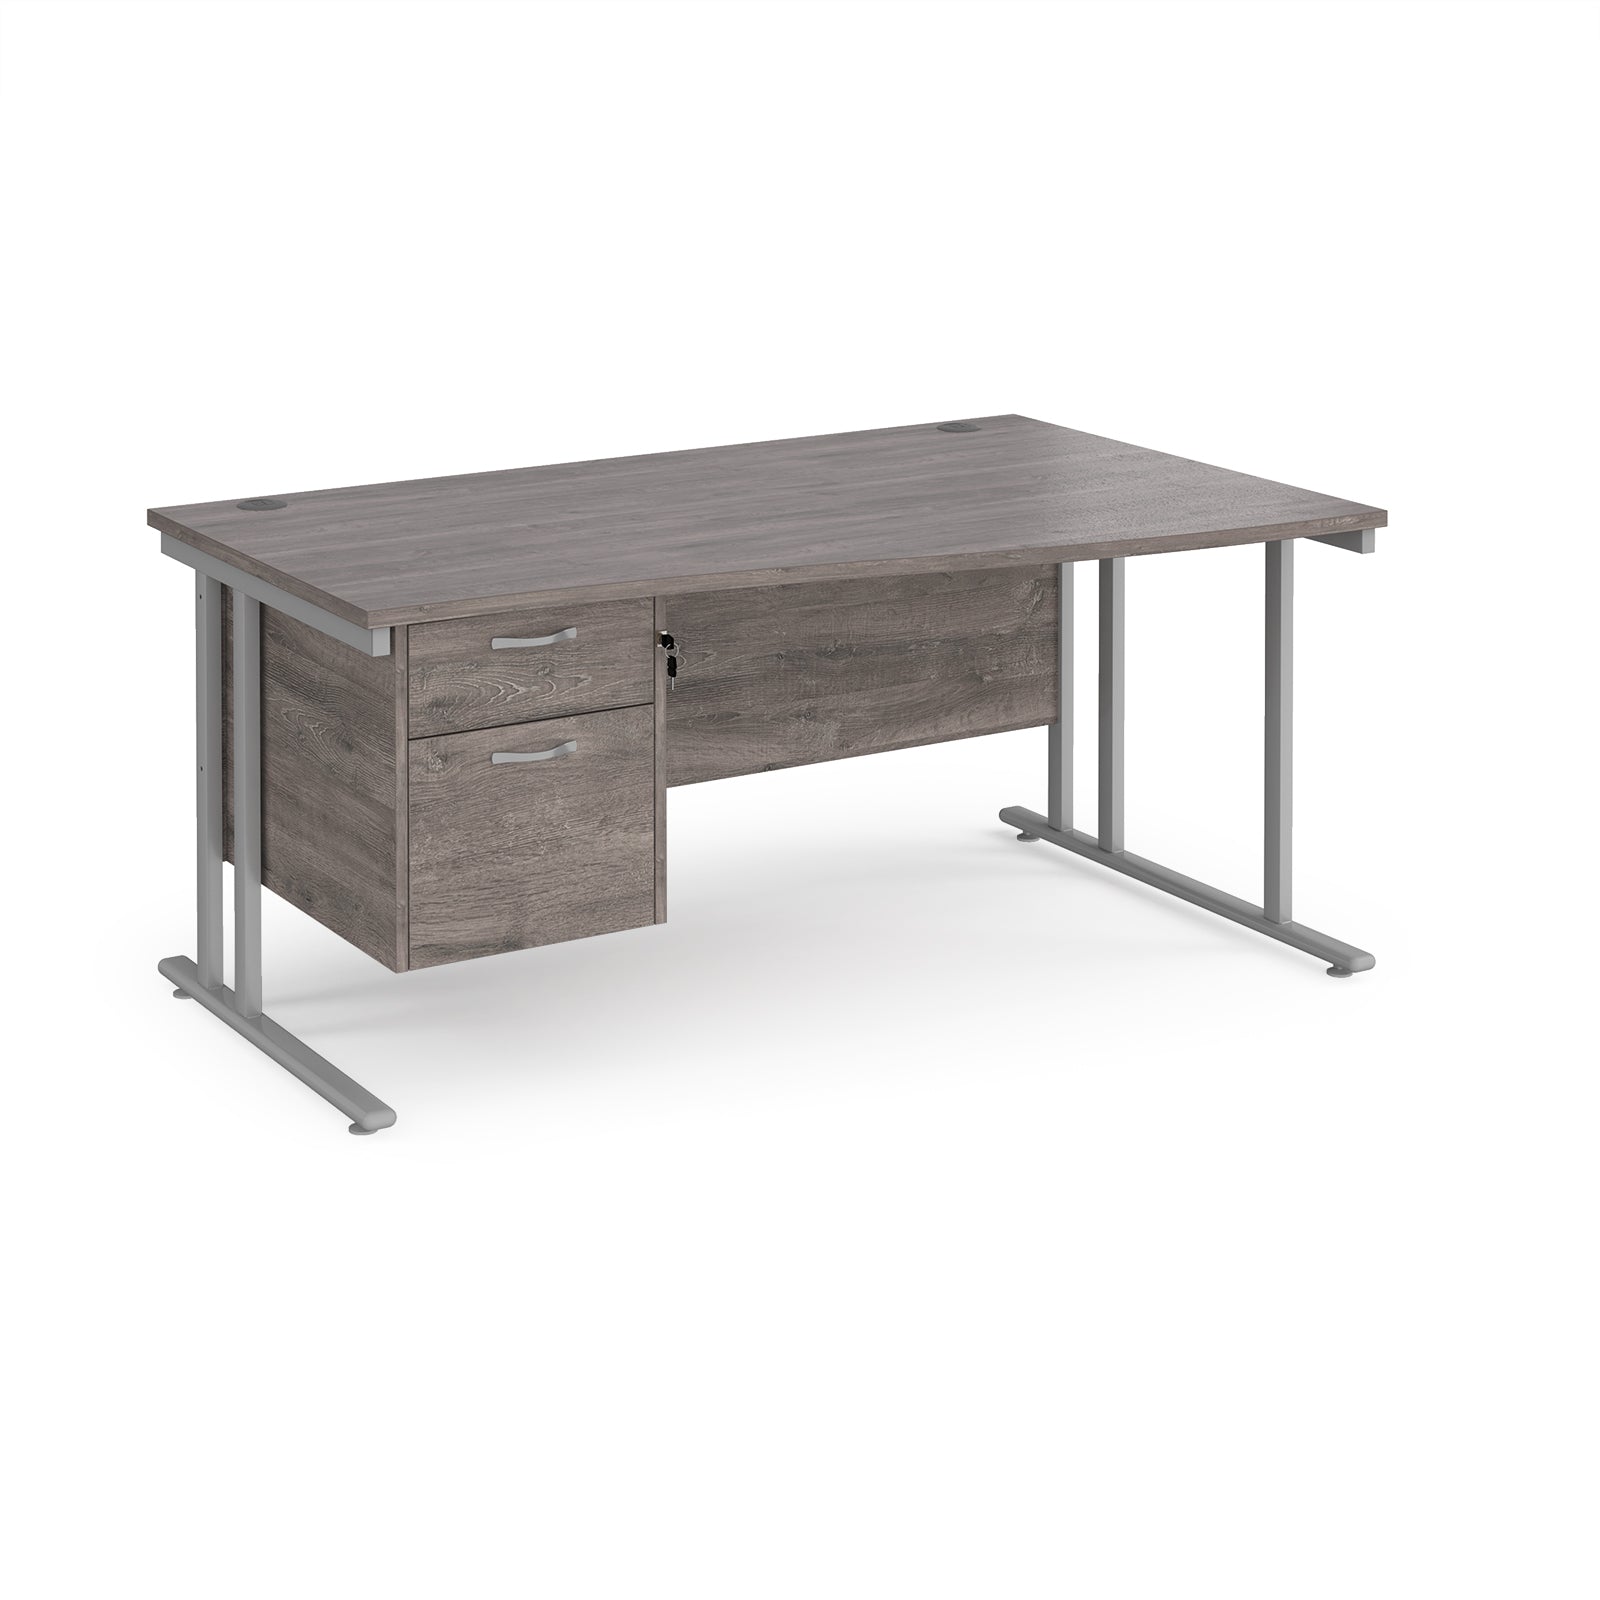 Maestro 25 cantilever right hand wave desk with 2 drawer ped